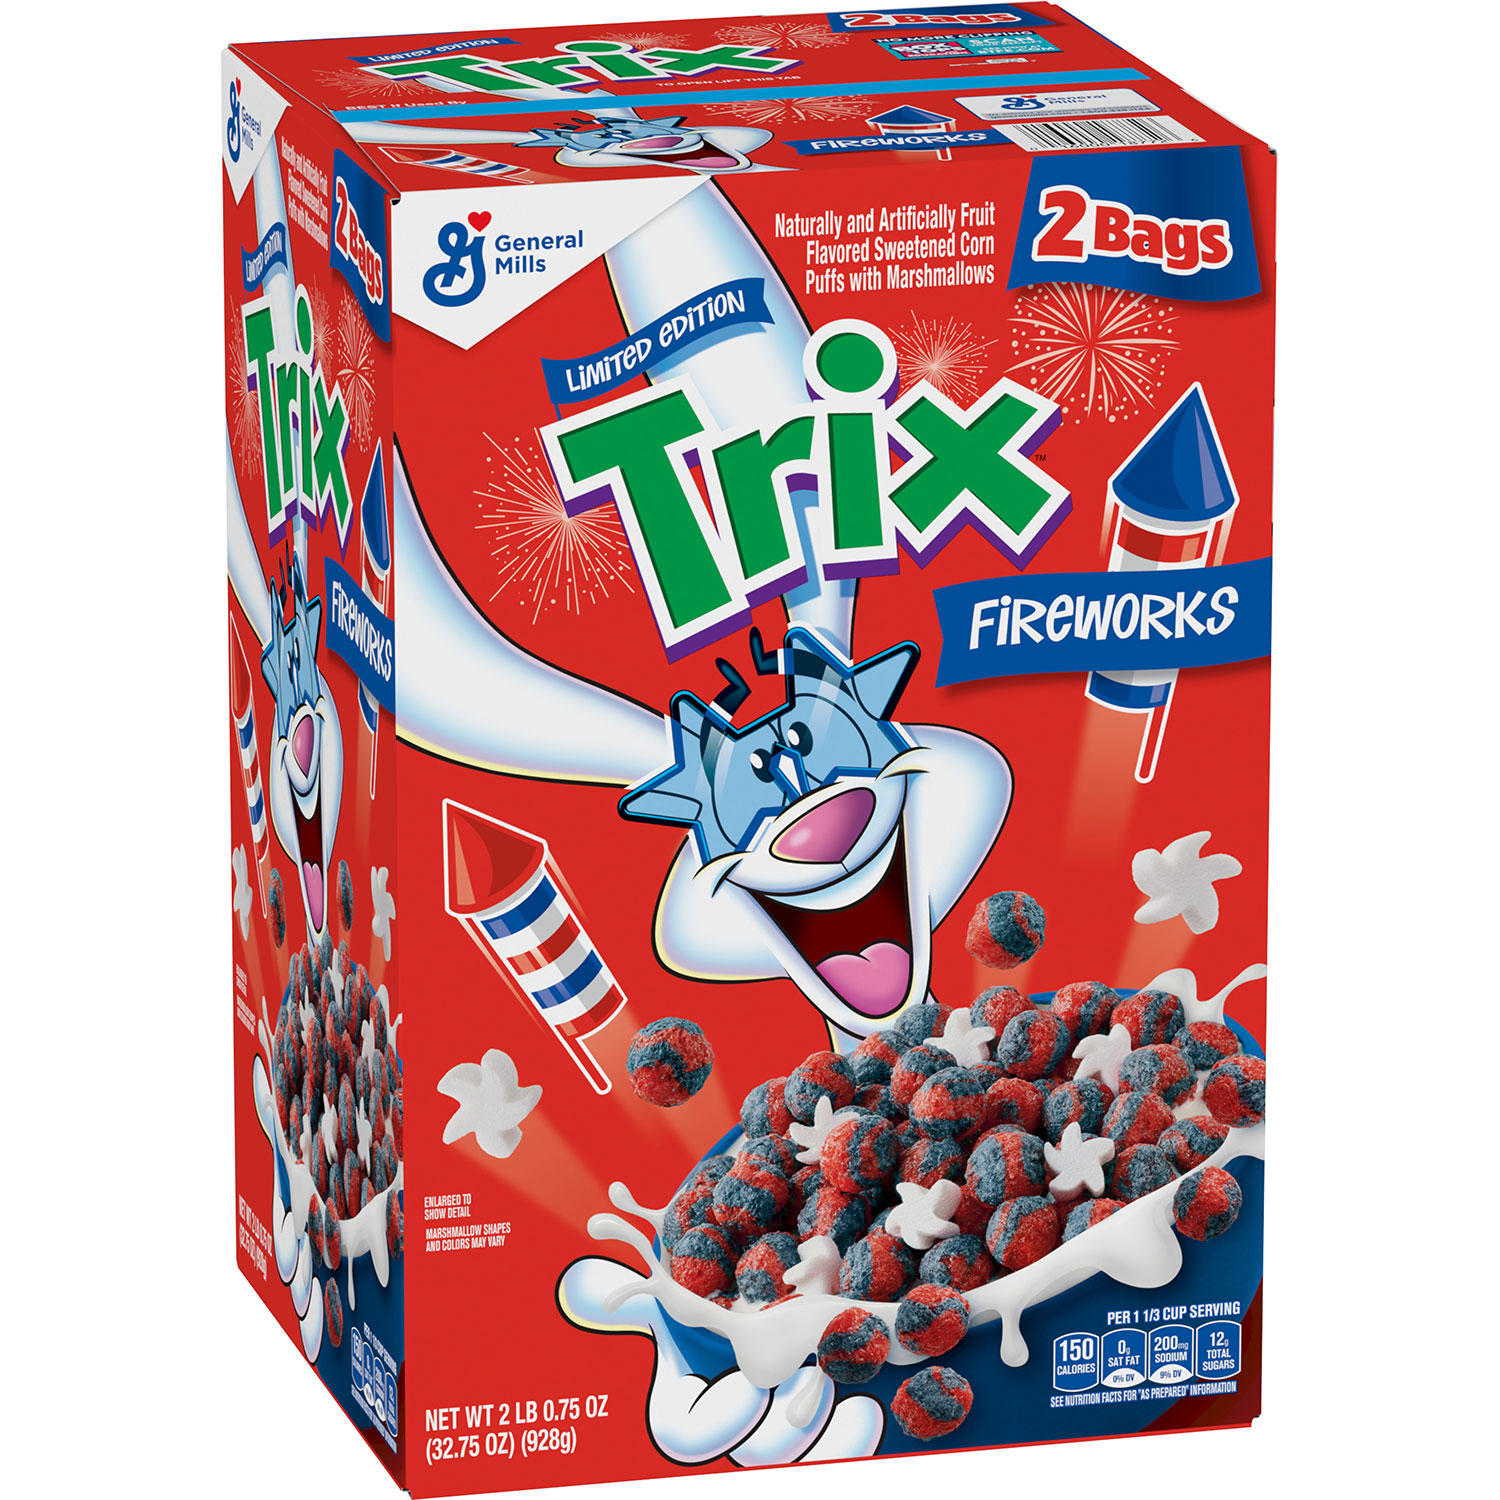 Sam's club Trix Fireworks cereal 2 bags $1.91 in club only ymmv